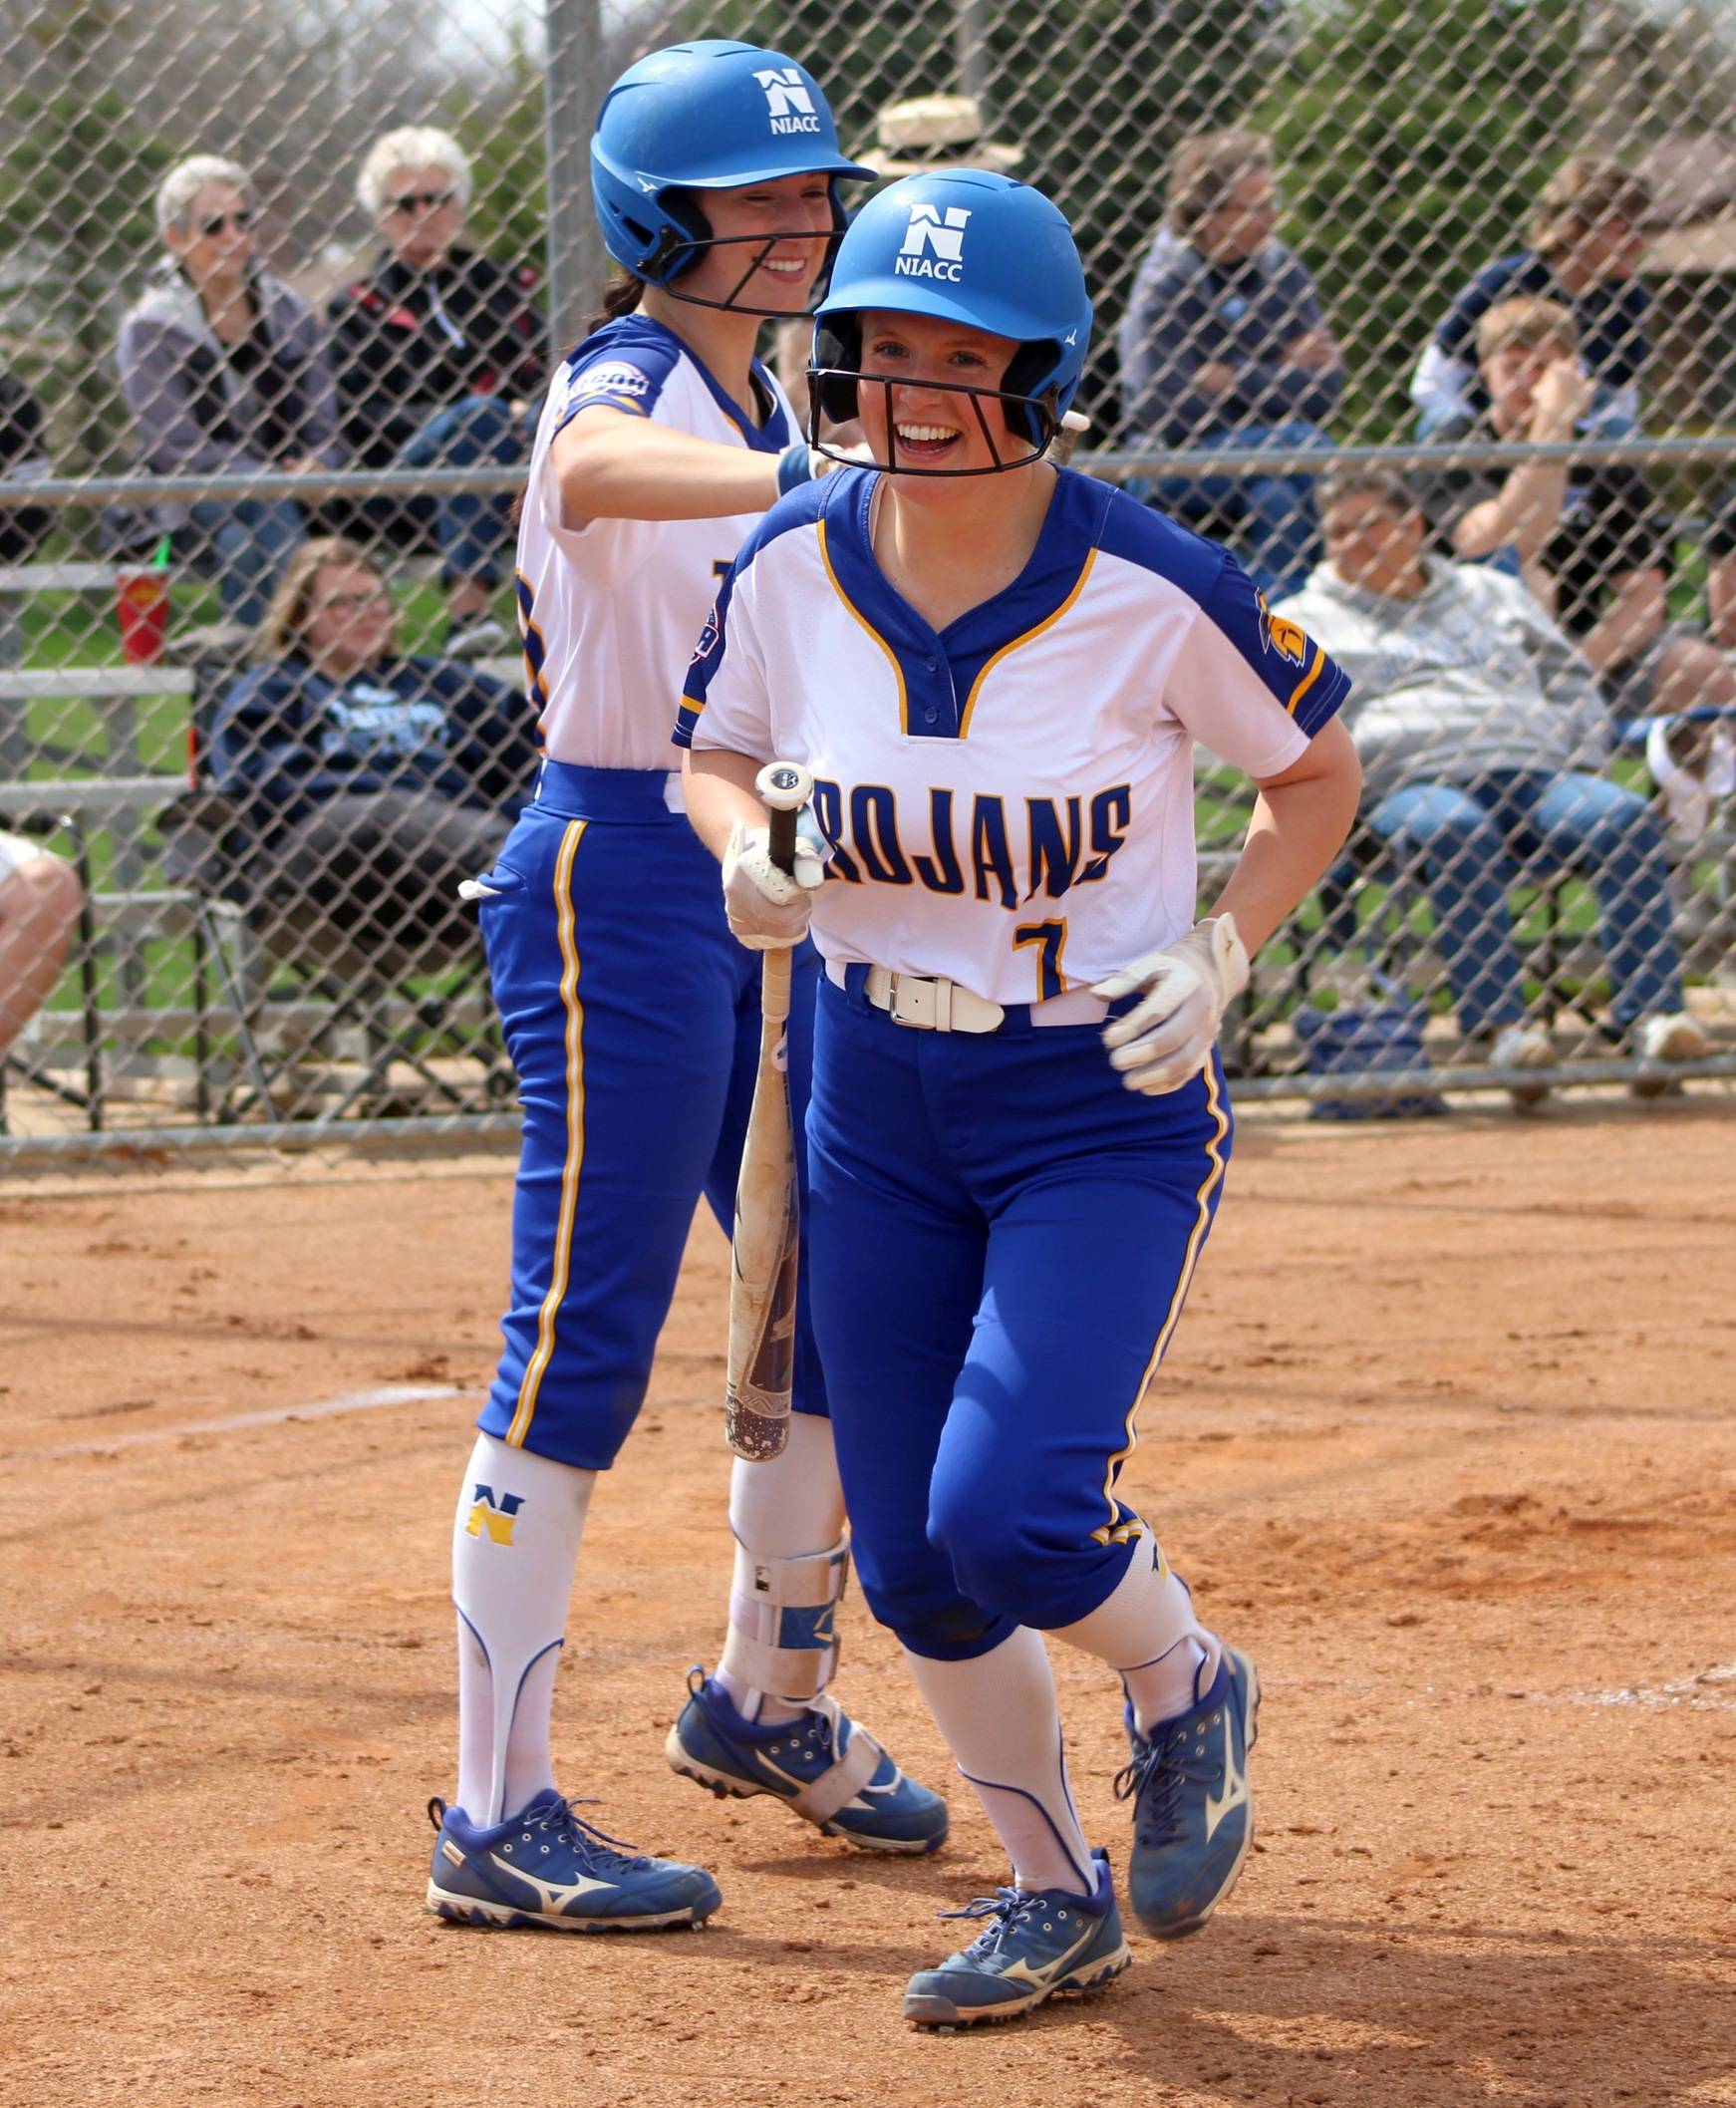 NIACC's Hailey Worman was a first-team all-region selection as a catcher.